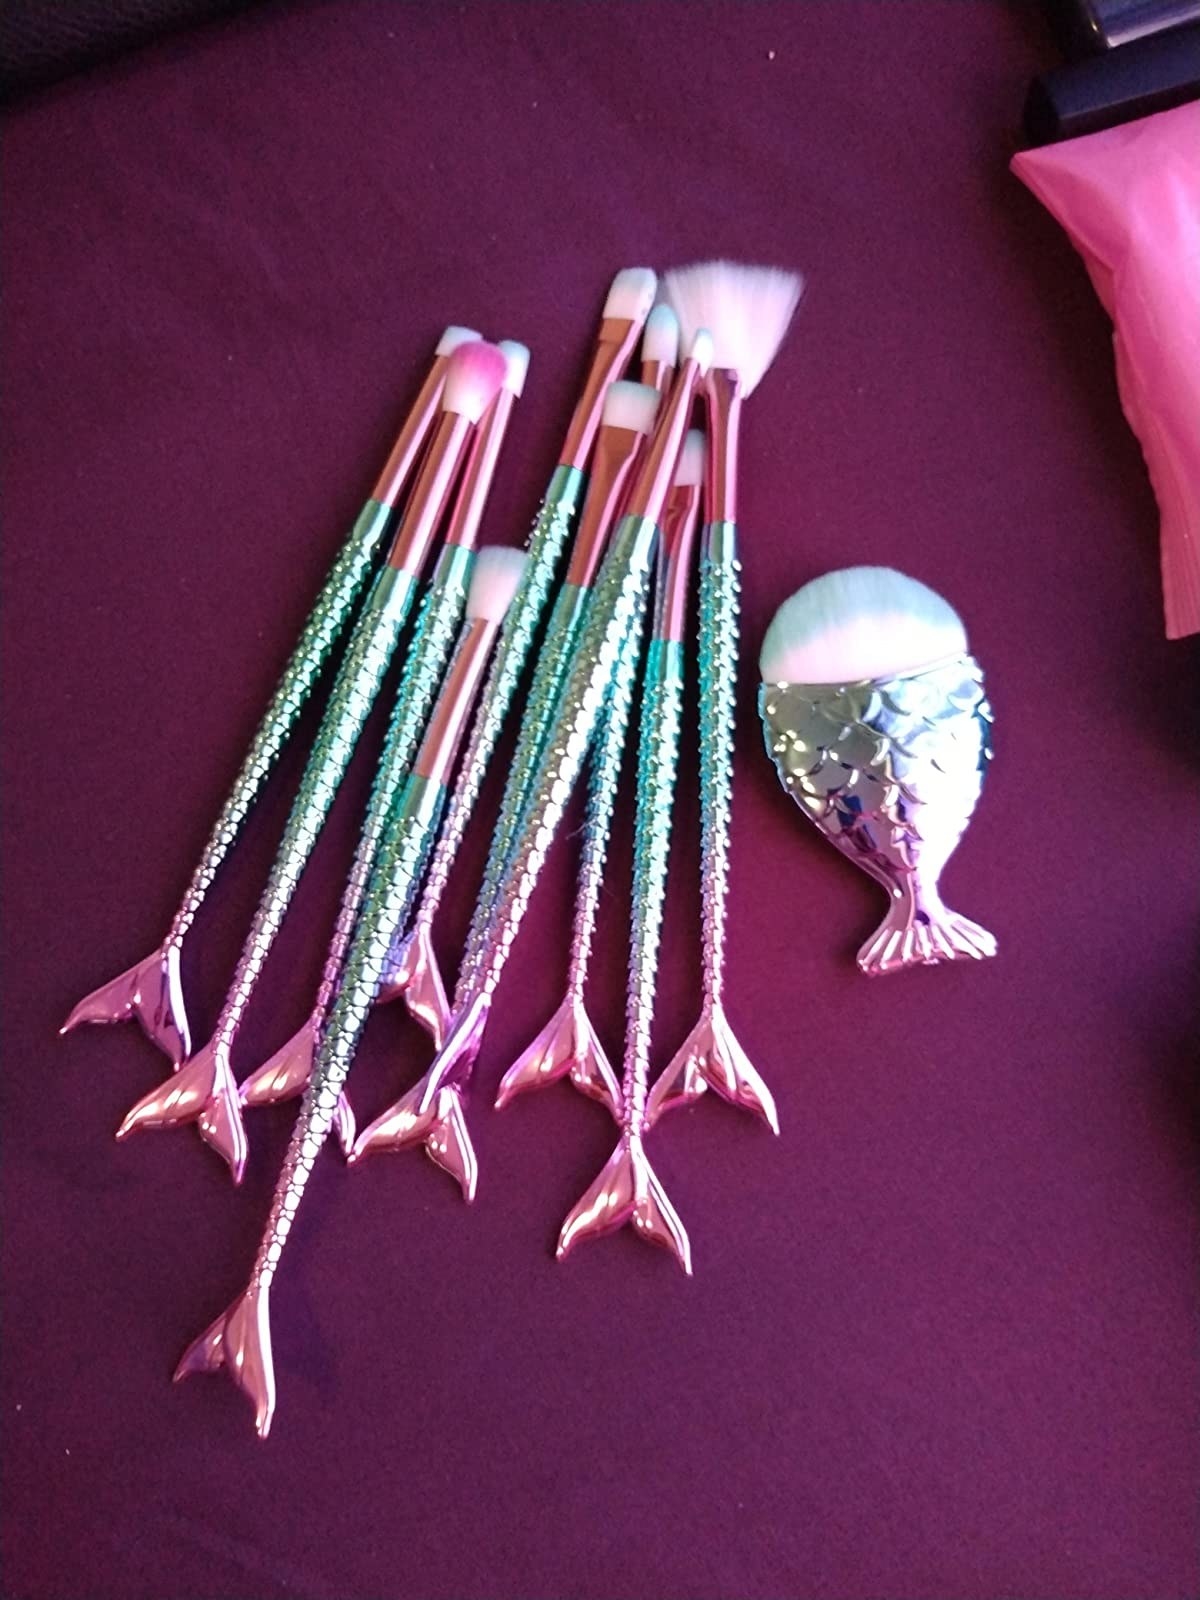 Reviewer&#x27;s set of mermaid-themed makeup brushes